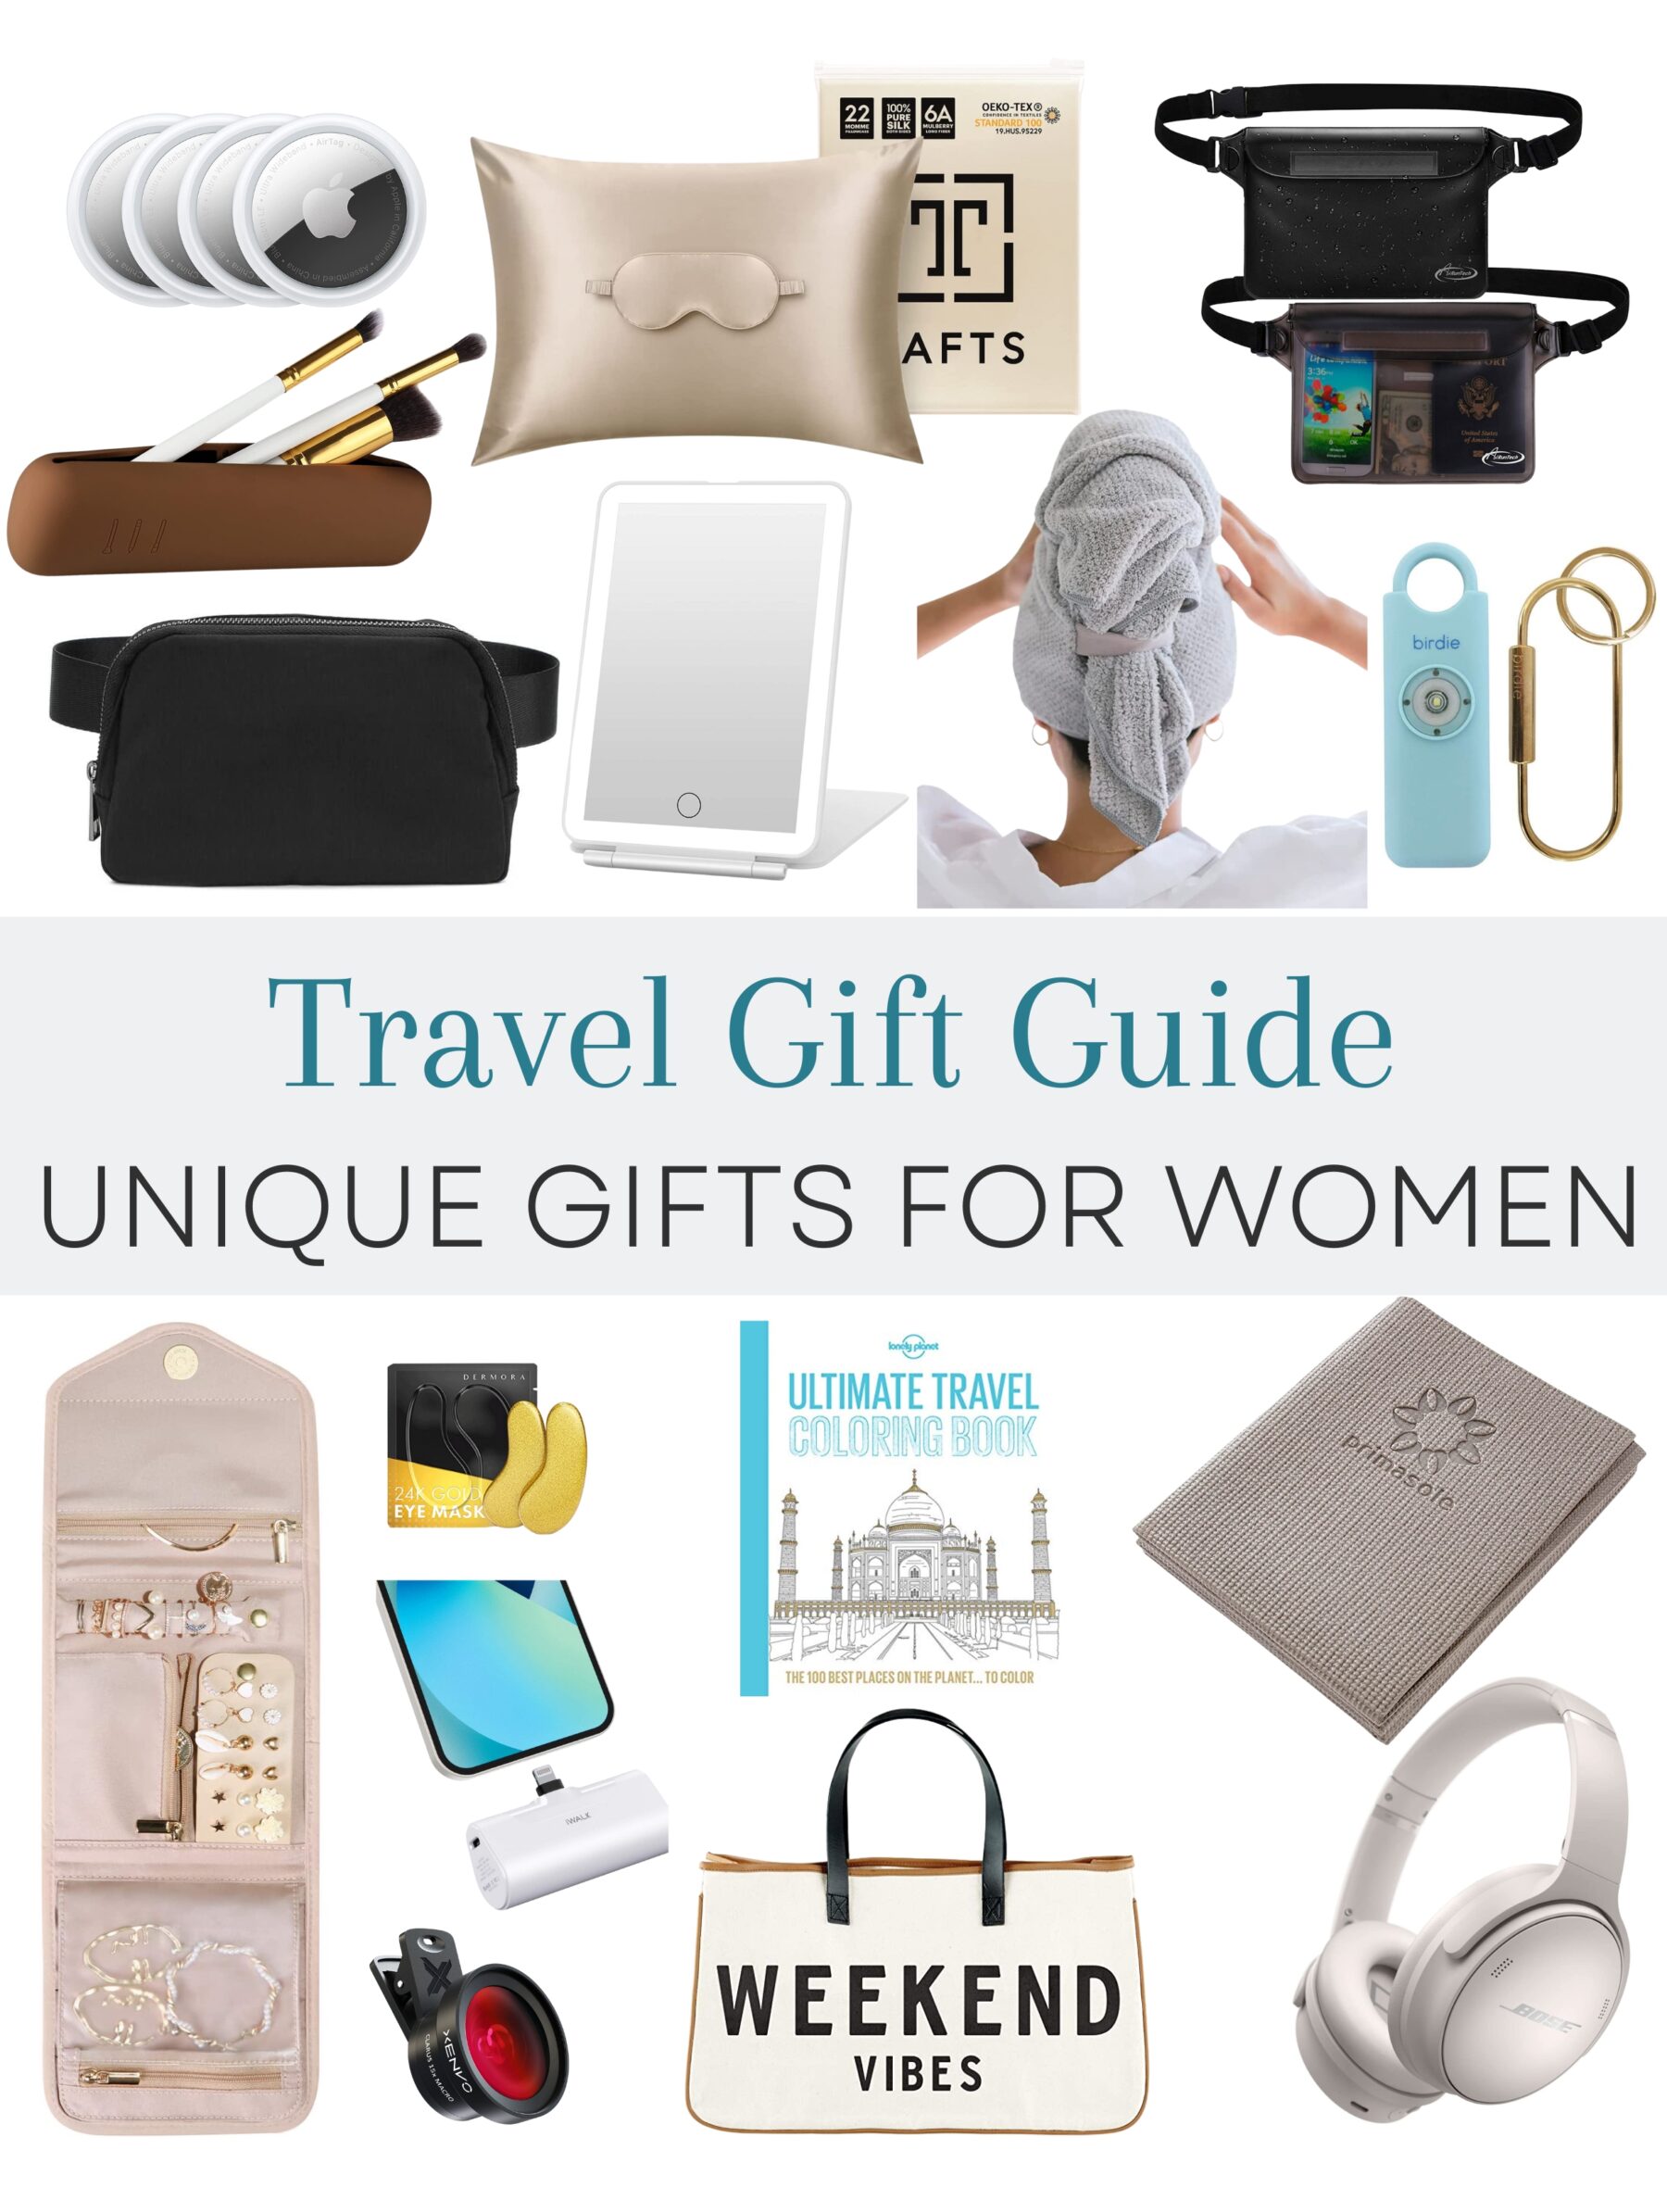 100 Travel Gifts Under 100 Dollars – TRAVEL IN STYLE | MELODY SCHMIDT